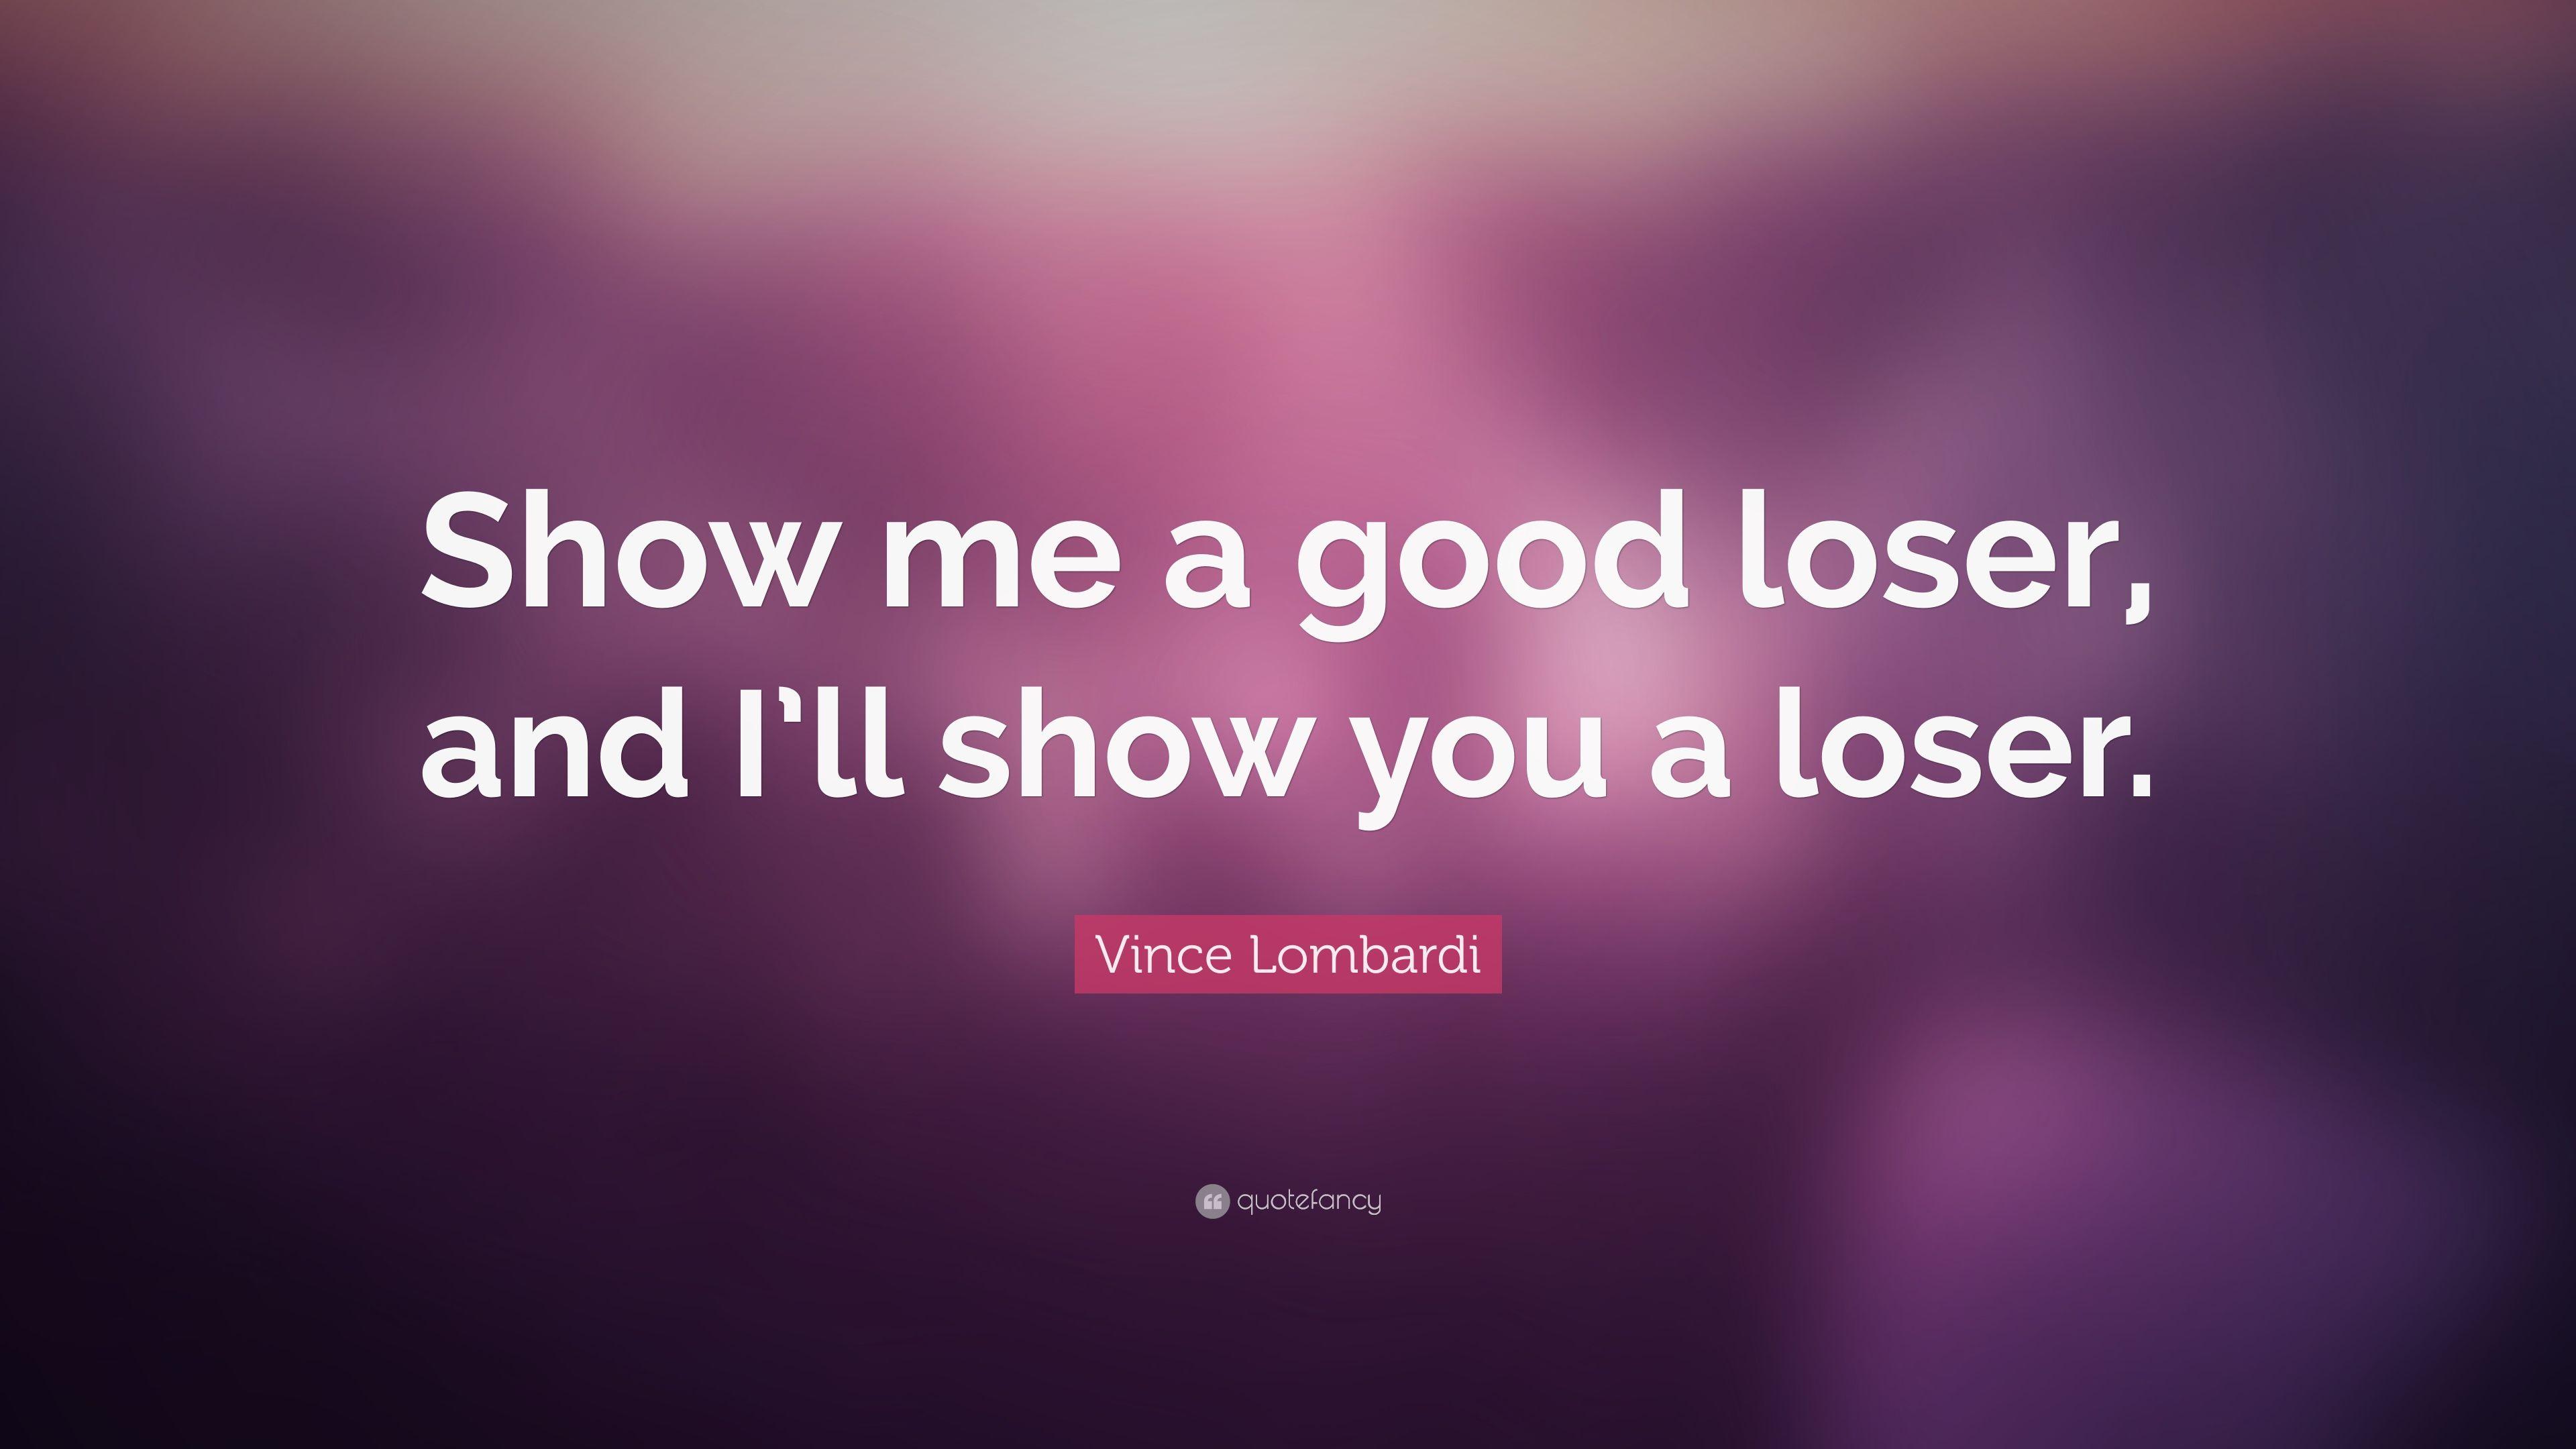 Vince Lombardi Quote: “Show me a good loser, and I'll show you a